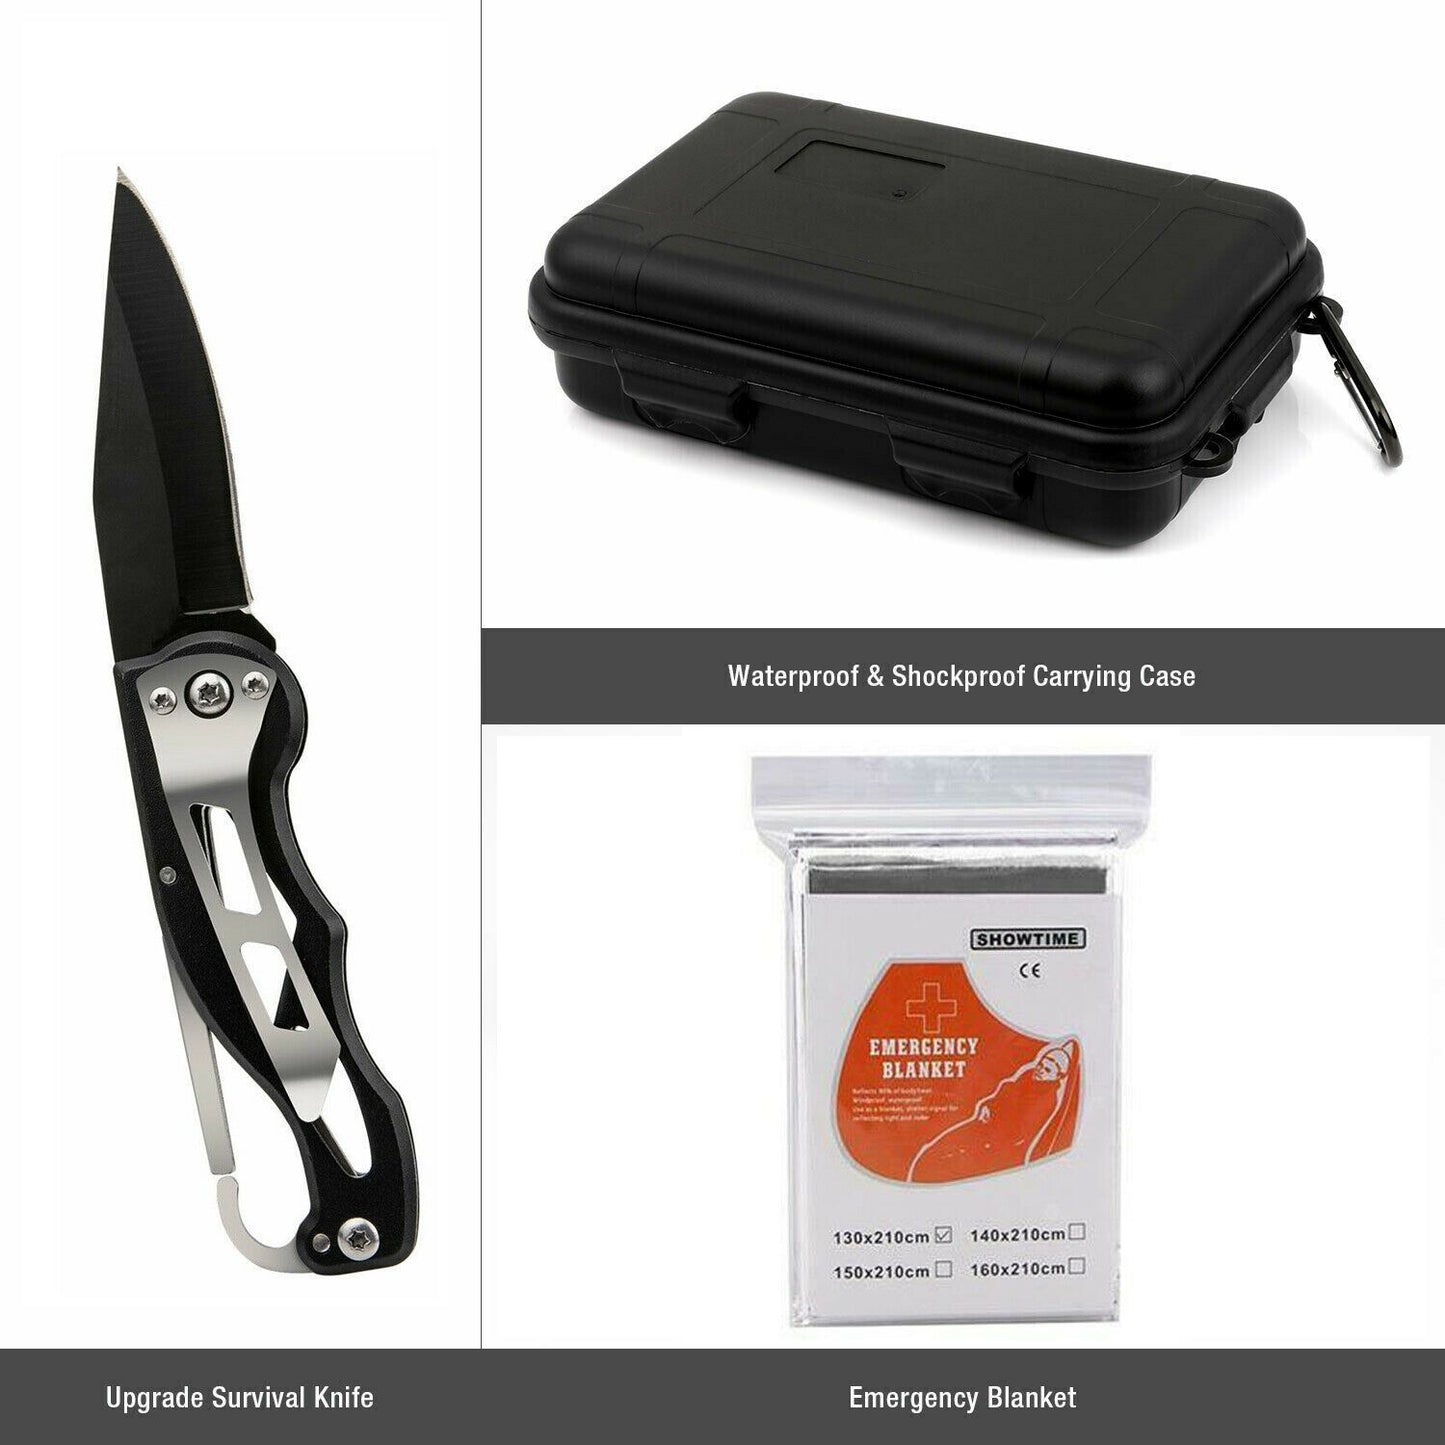 The upgraded survivla knife, waterproof & shockproof carrying case, and emergency blanket